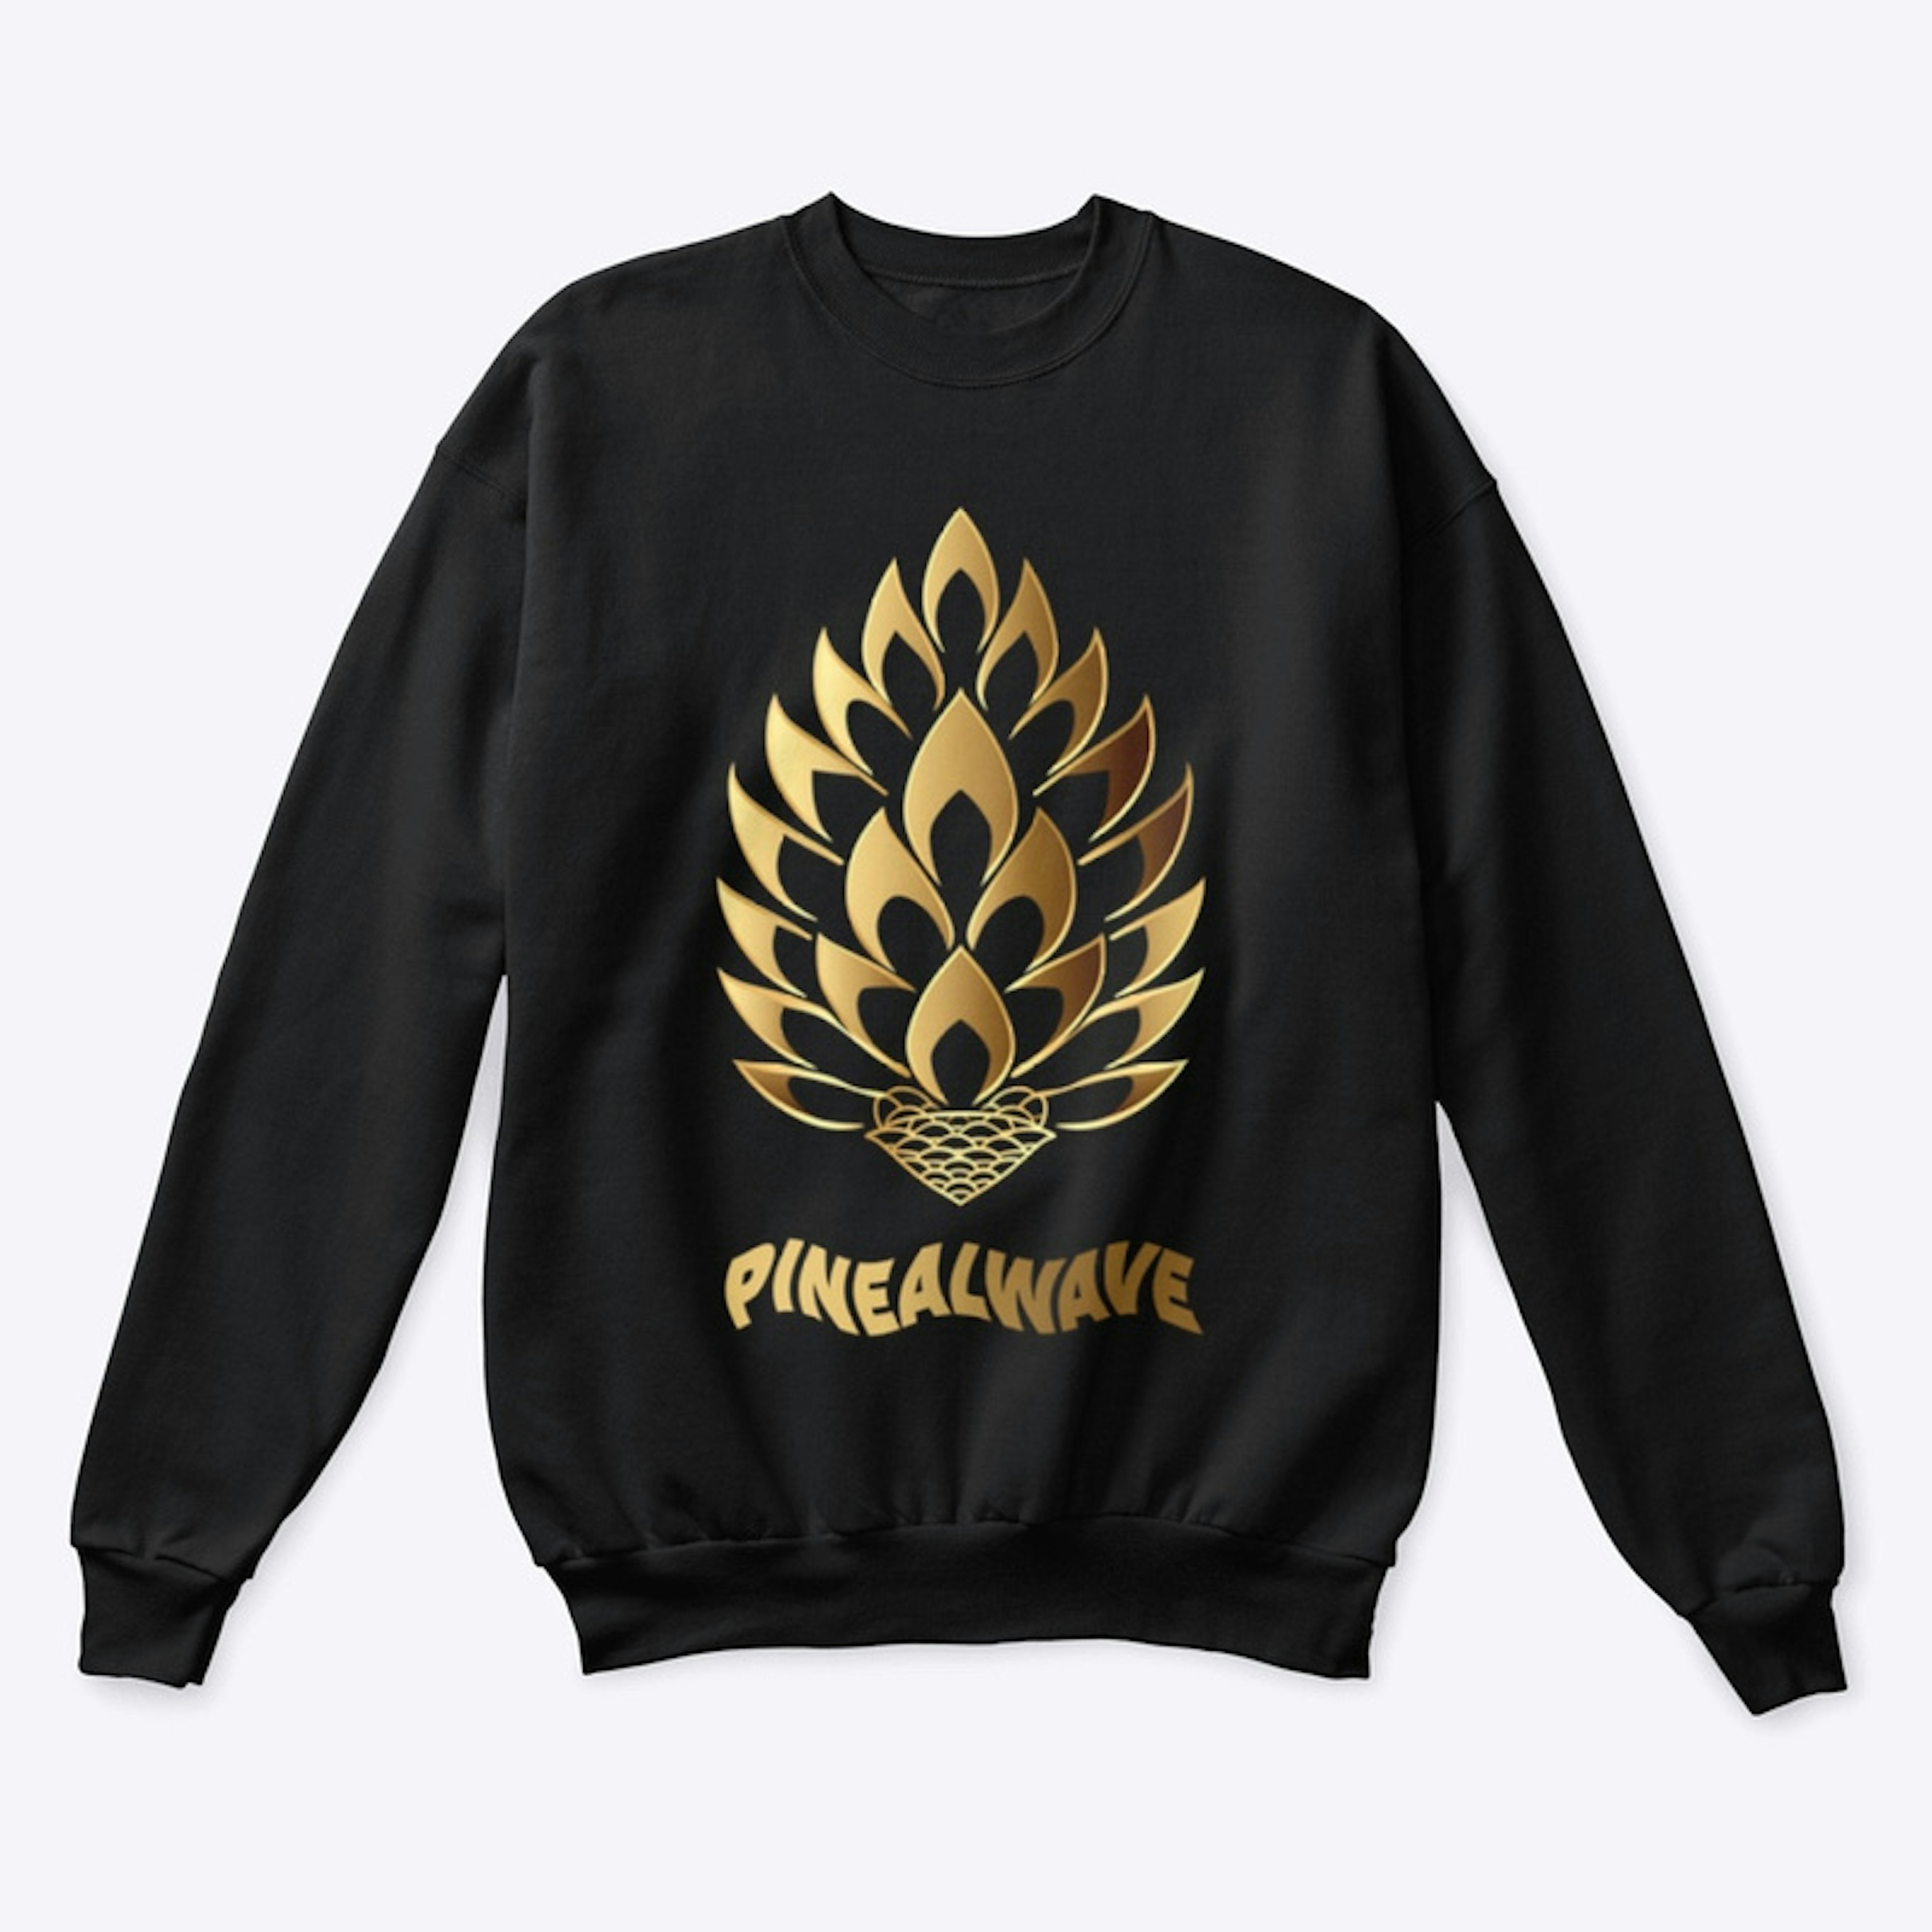 Pinealwave Gold Pinecone